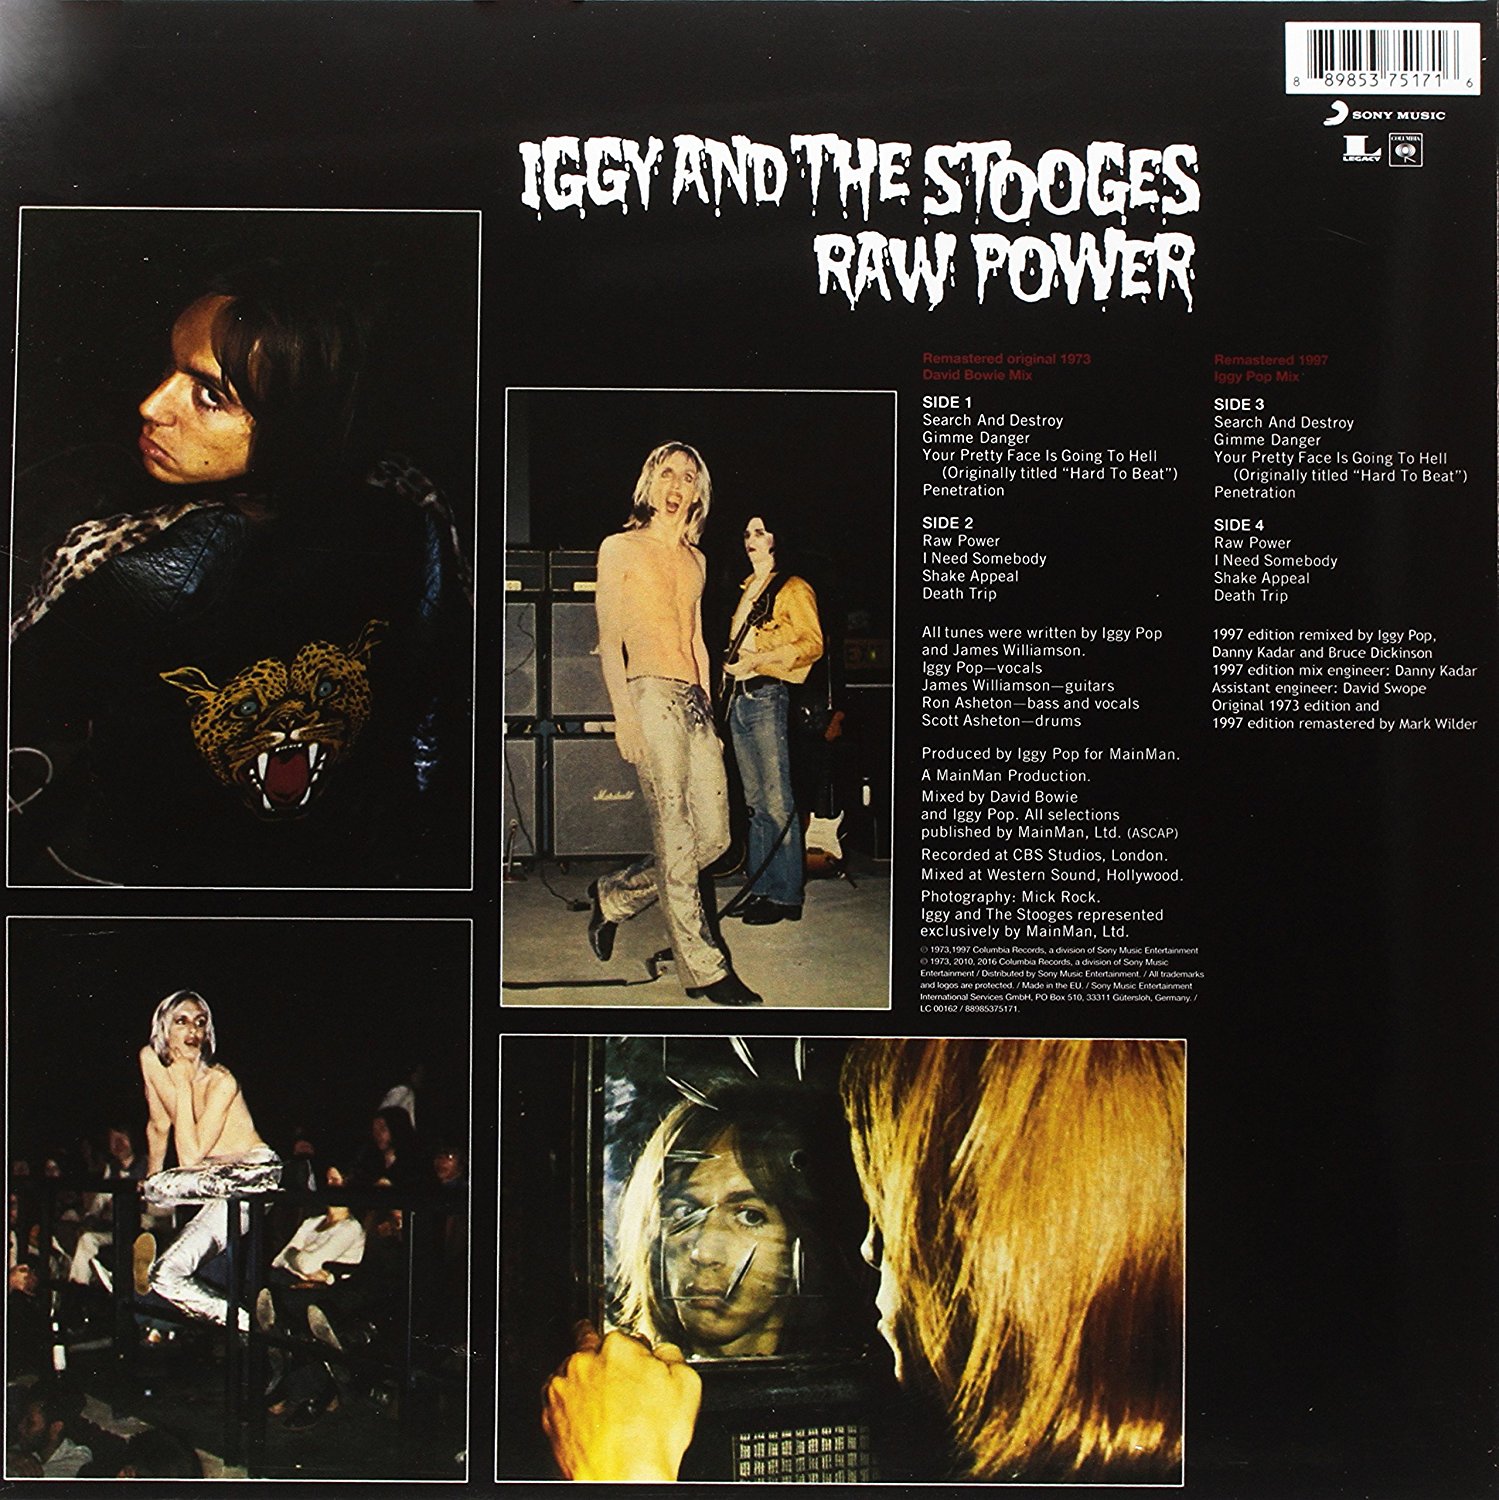 the stooges raw power back cover